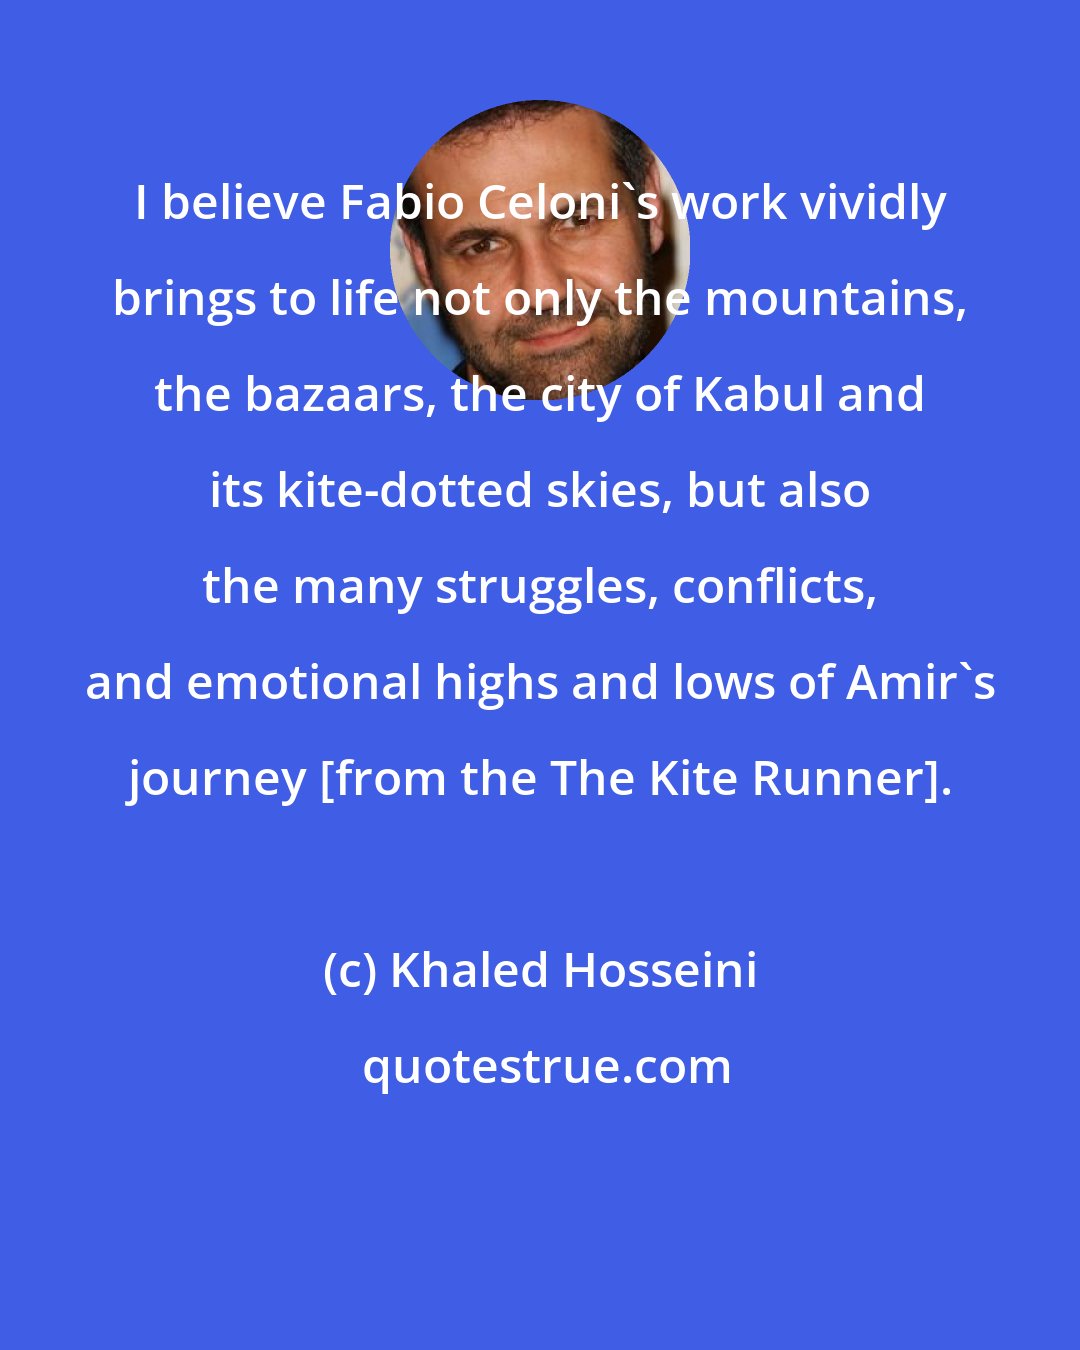 Khaled Hosseini: I believe Fabio Celoni's work vividly brings to life not only the mountains, the bazaars, the city of Kabul and its kite-dotted skies, but also the many struggles, conflicts, and emotional highs and lows of Amir's journey [from the The Kite Runner].